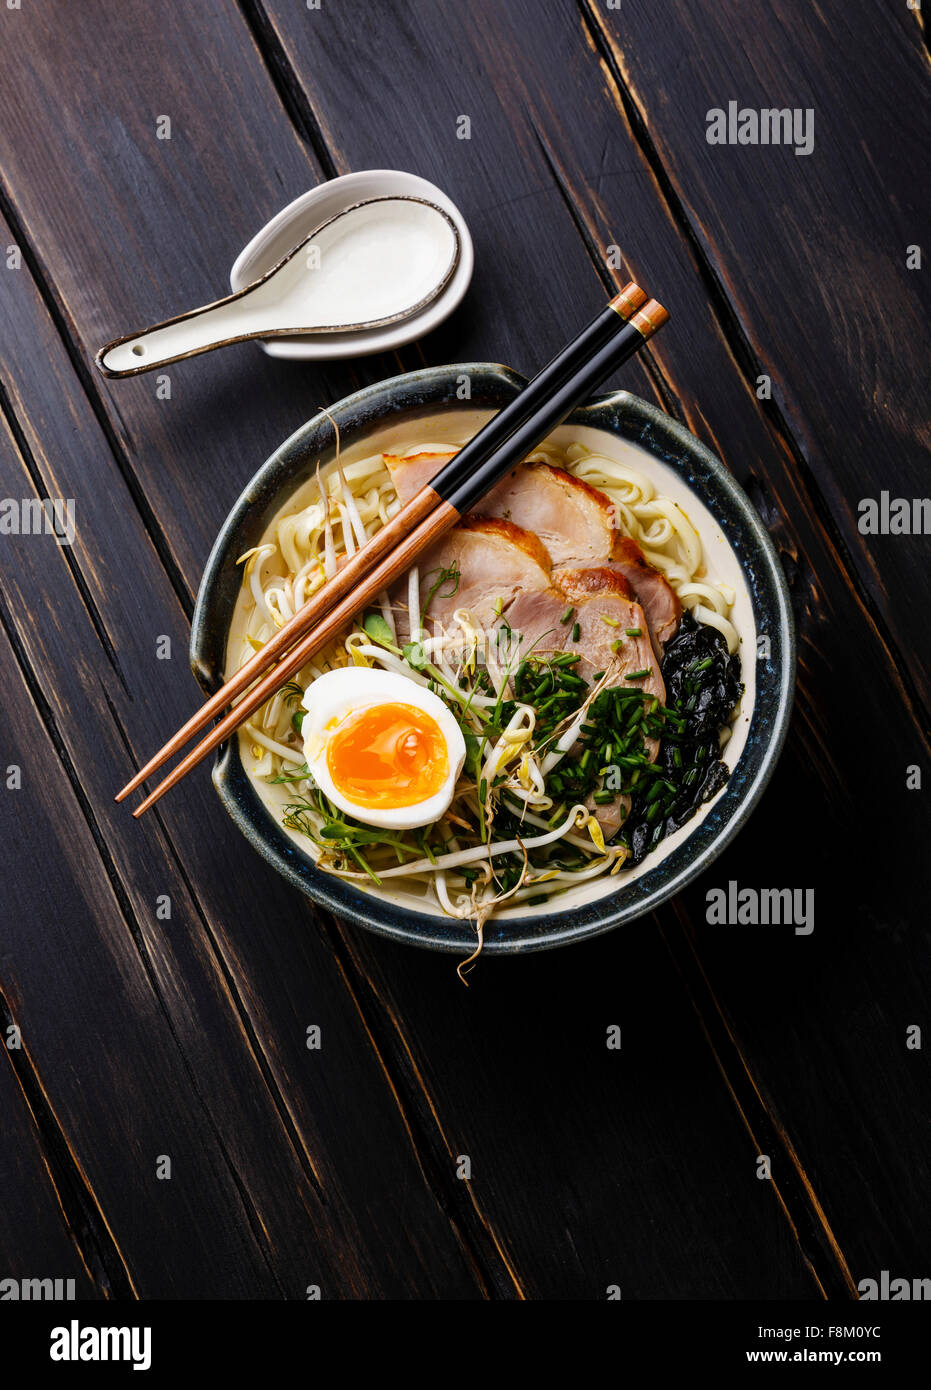 Udon noodle with boiled pork, wheat germ and egg on dark wooden background Stock Photo